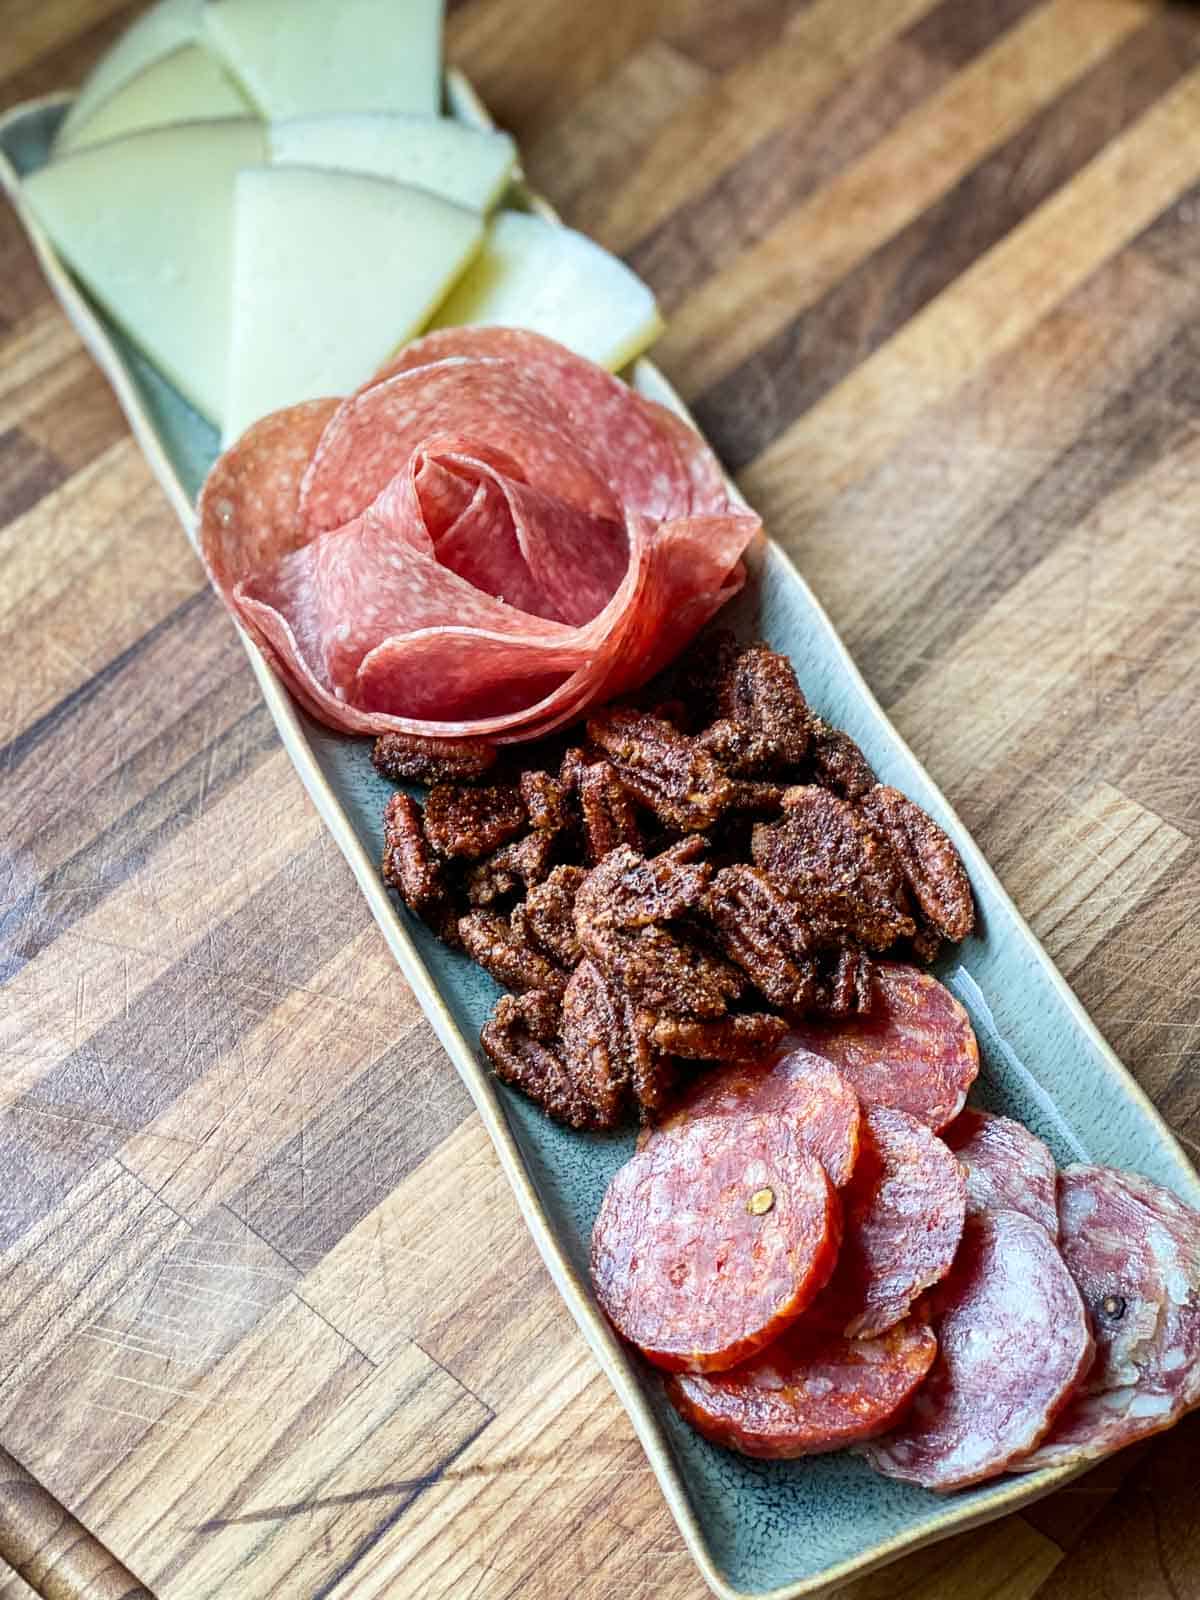 Small charcuterie board with meats and cheeses and candied pecans.